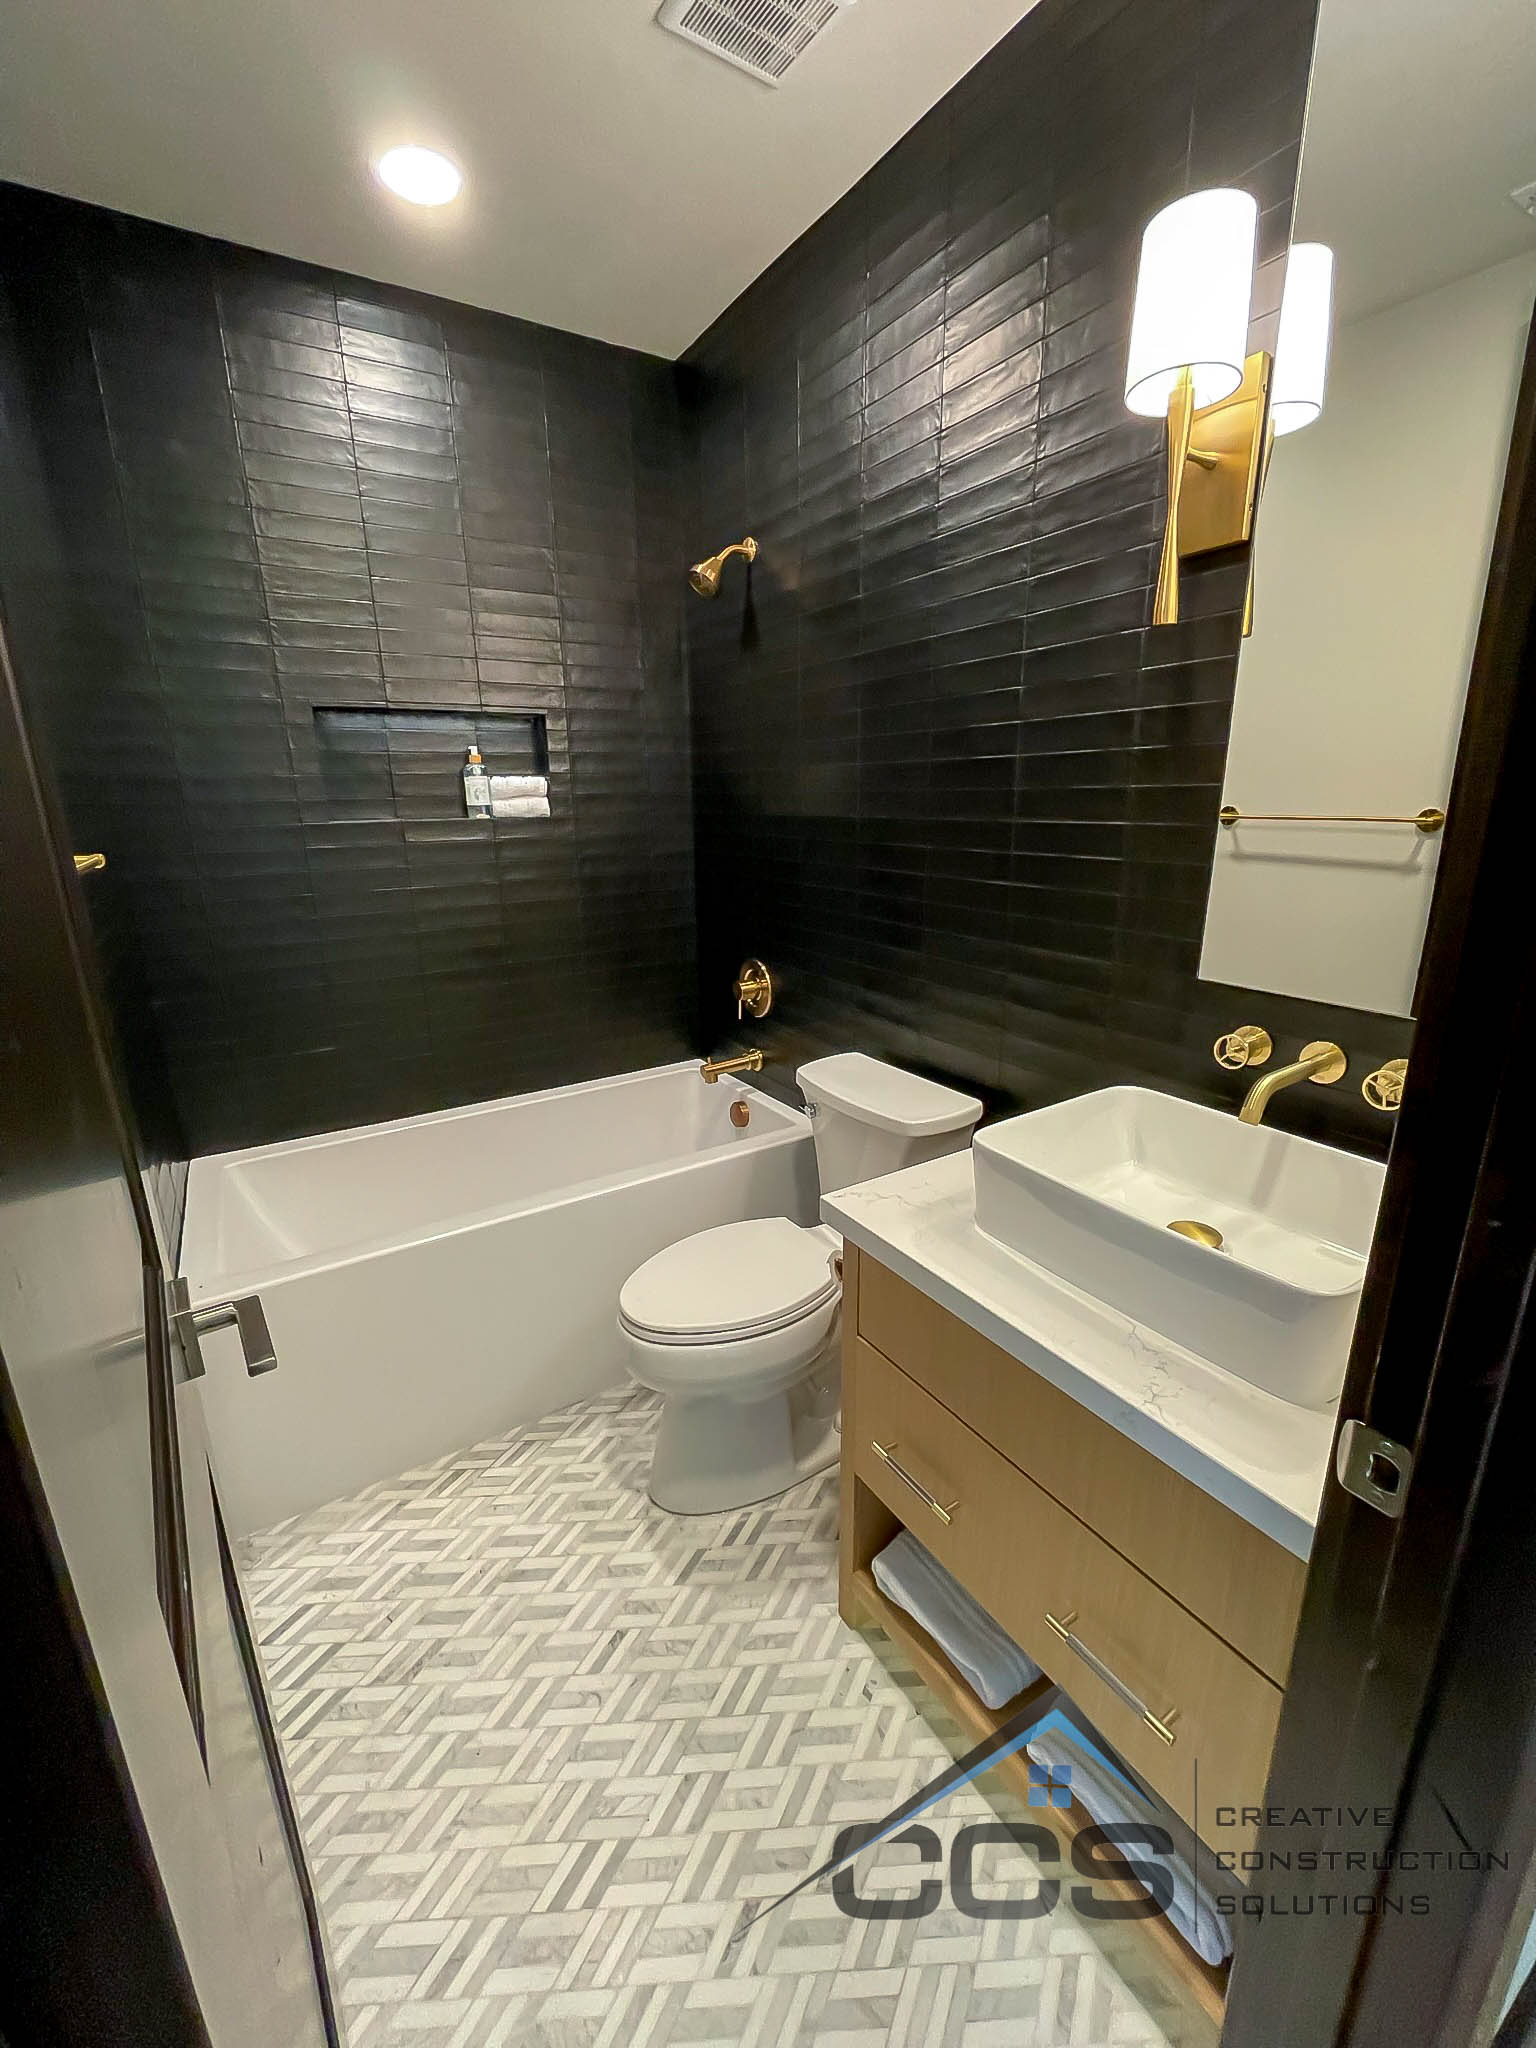 An image of a Utah basement bathroom. A logo for CCS Creative Construction Solutions of Utah is in the bottom right-hand corner.